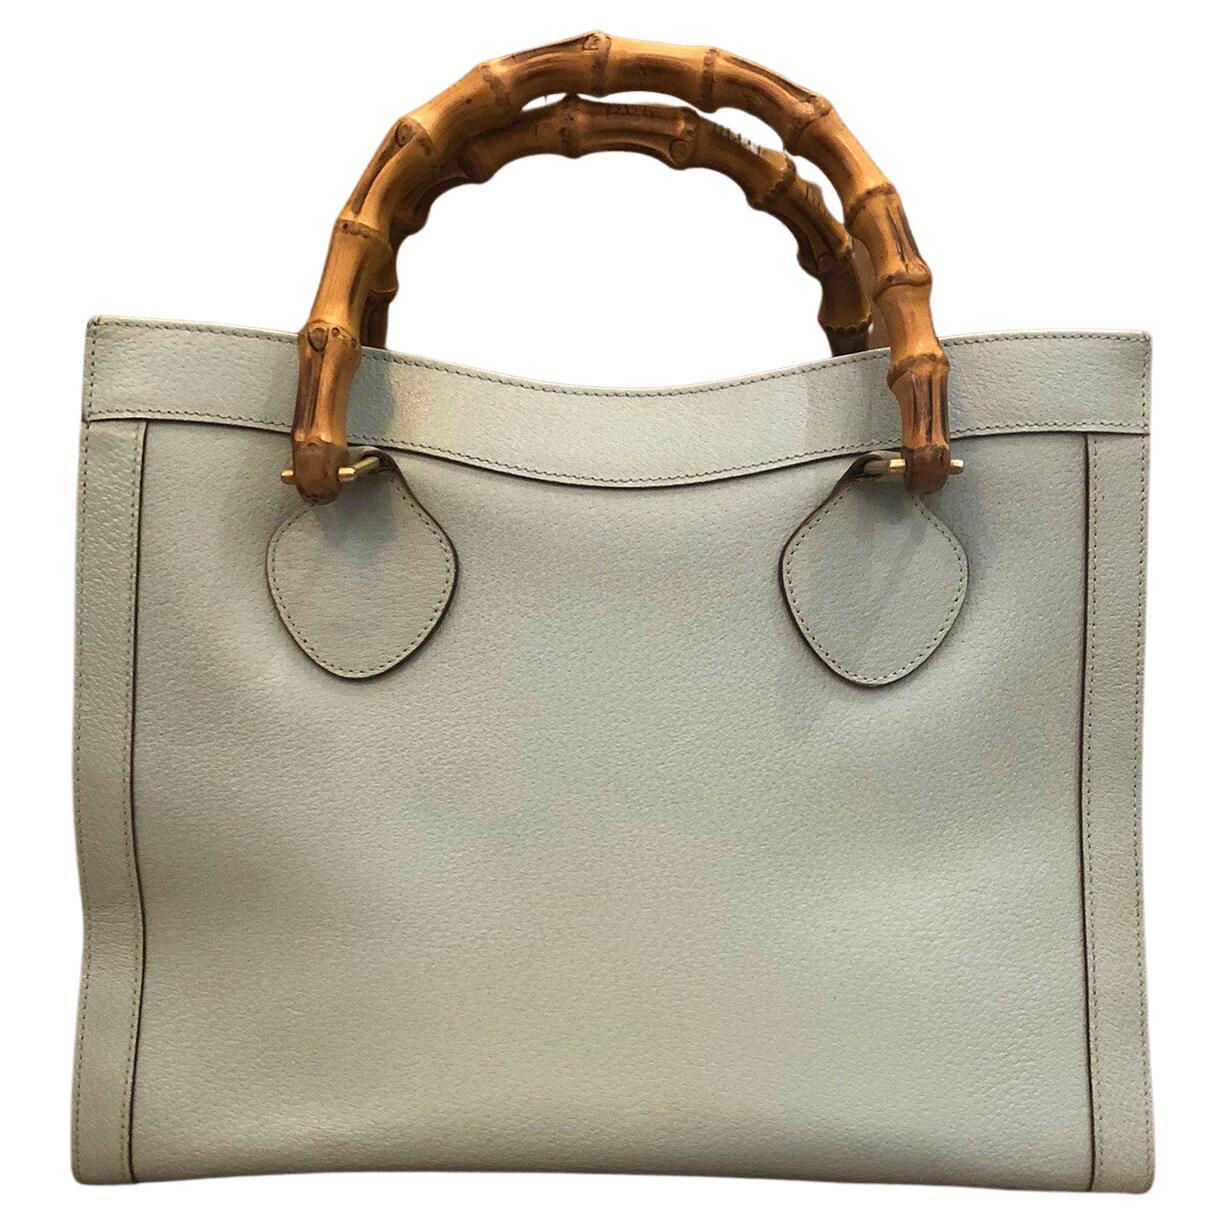 1990s Vintage GUCCI Light Green Leather Bamboo Tote Diana Tote Bag (Medium)